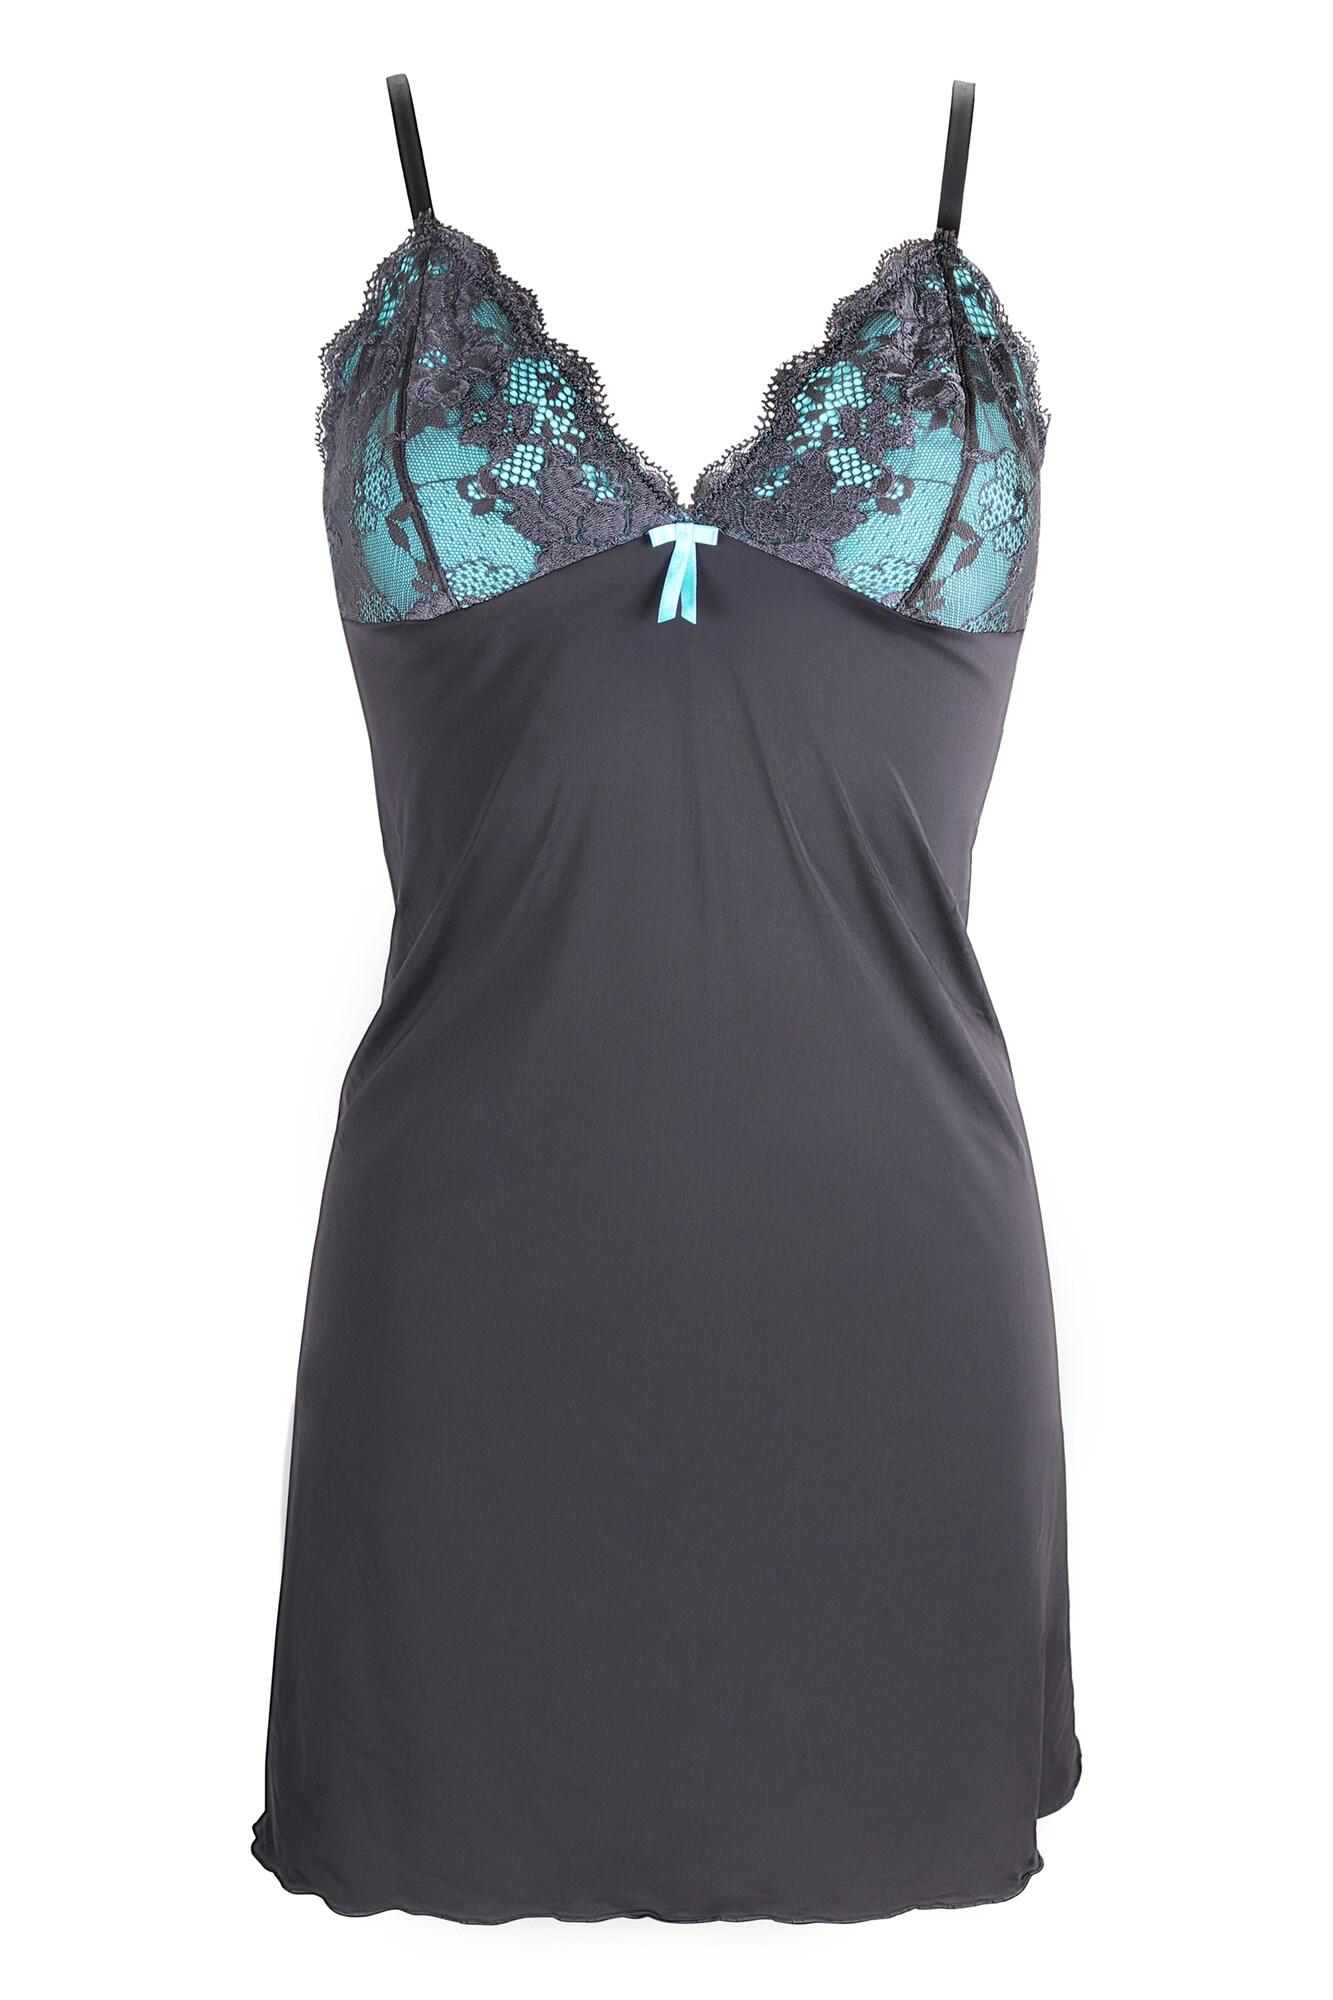 Amour Luxe Chemise | Pour Moi | Amour Luxe Chemise | Slate/Aqua | Lace ...